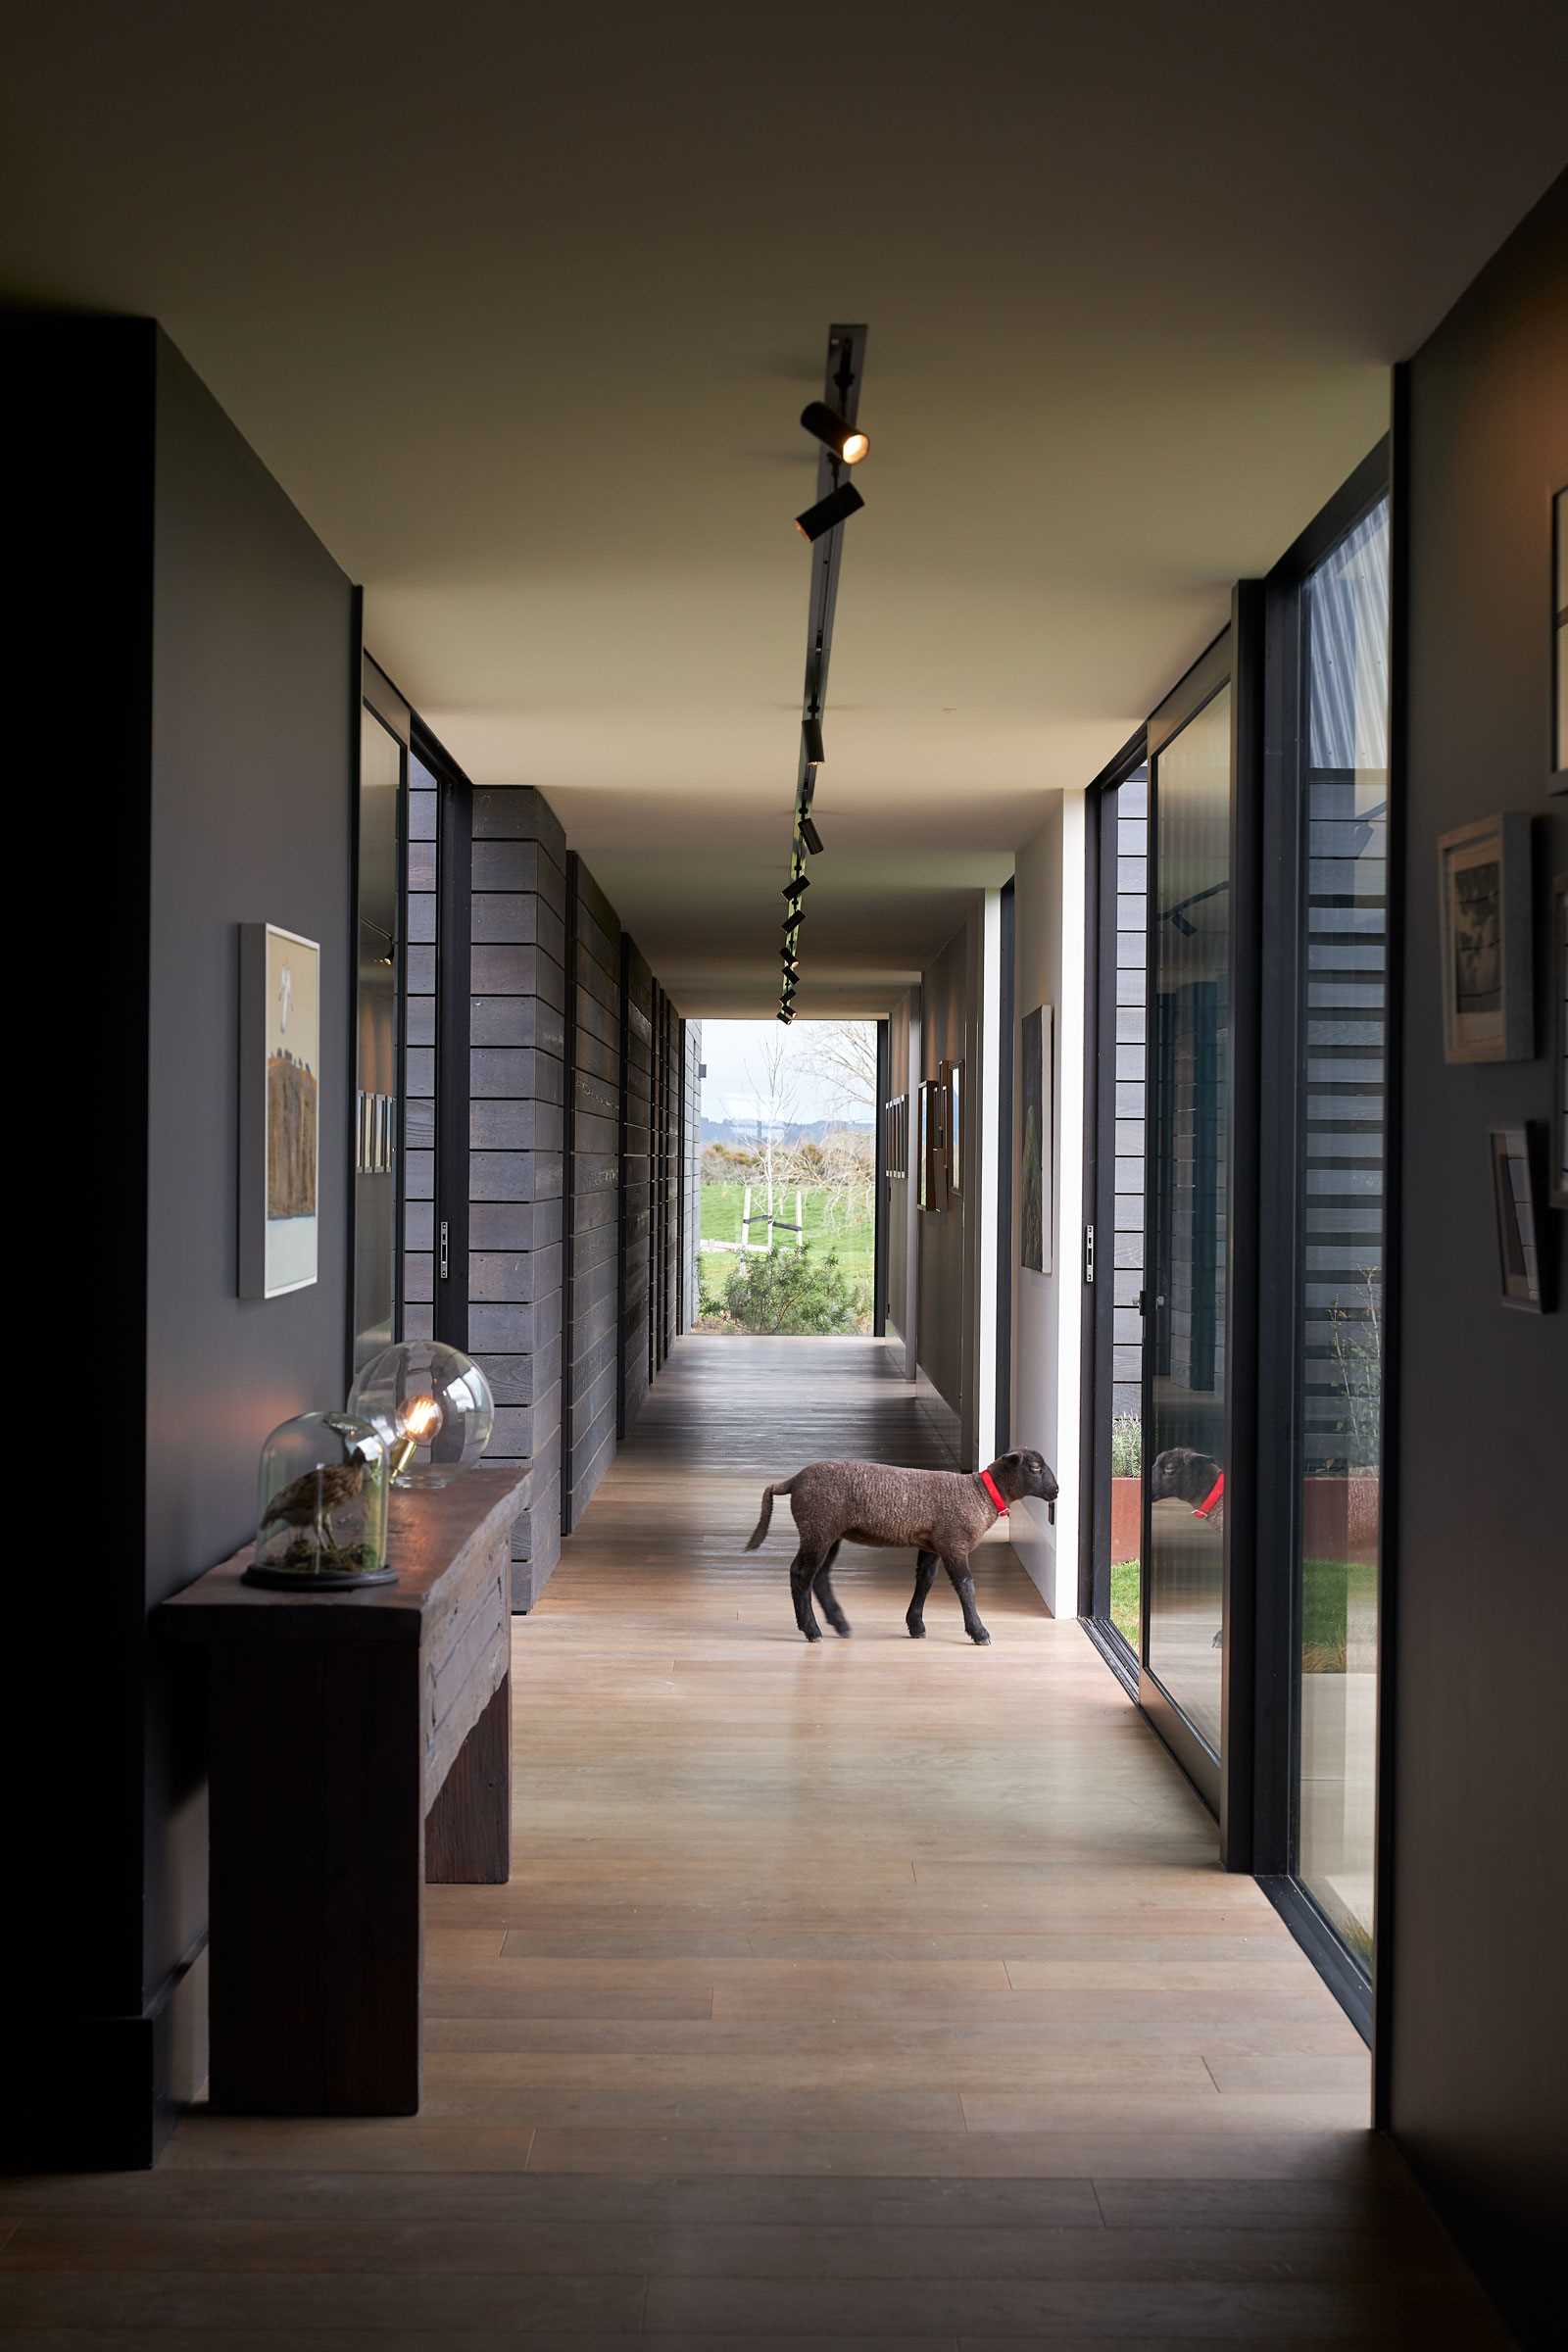 A hallway with wood floors connects the various spaces of the home.